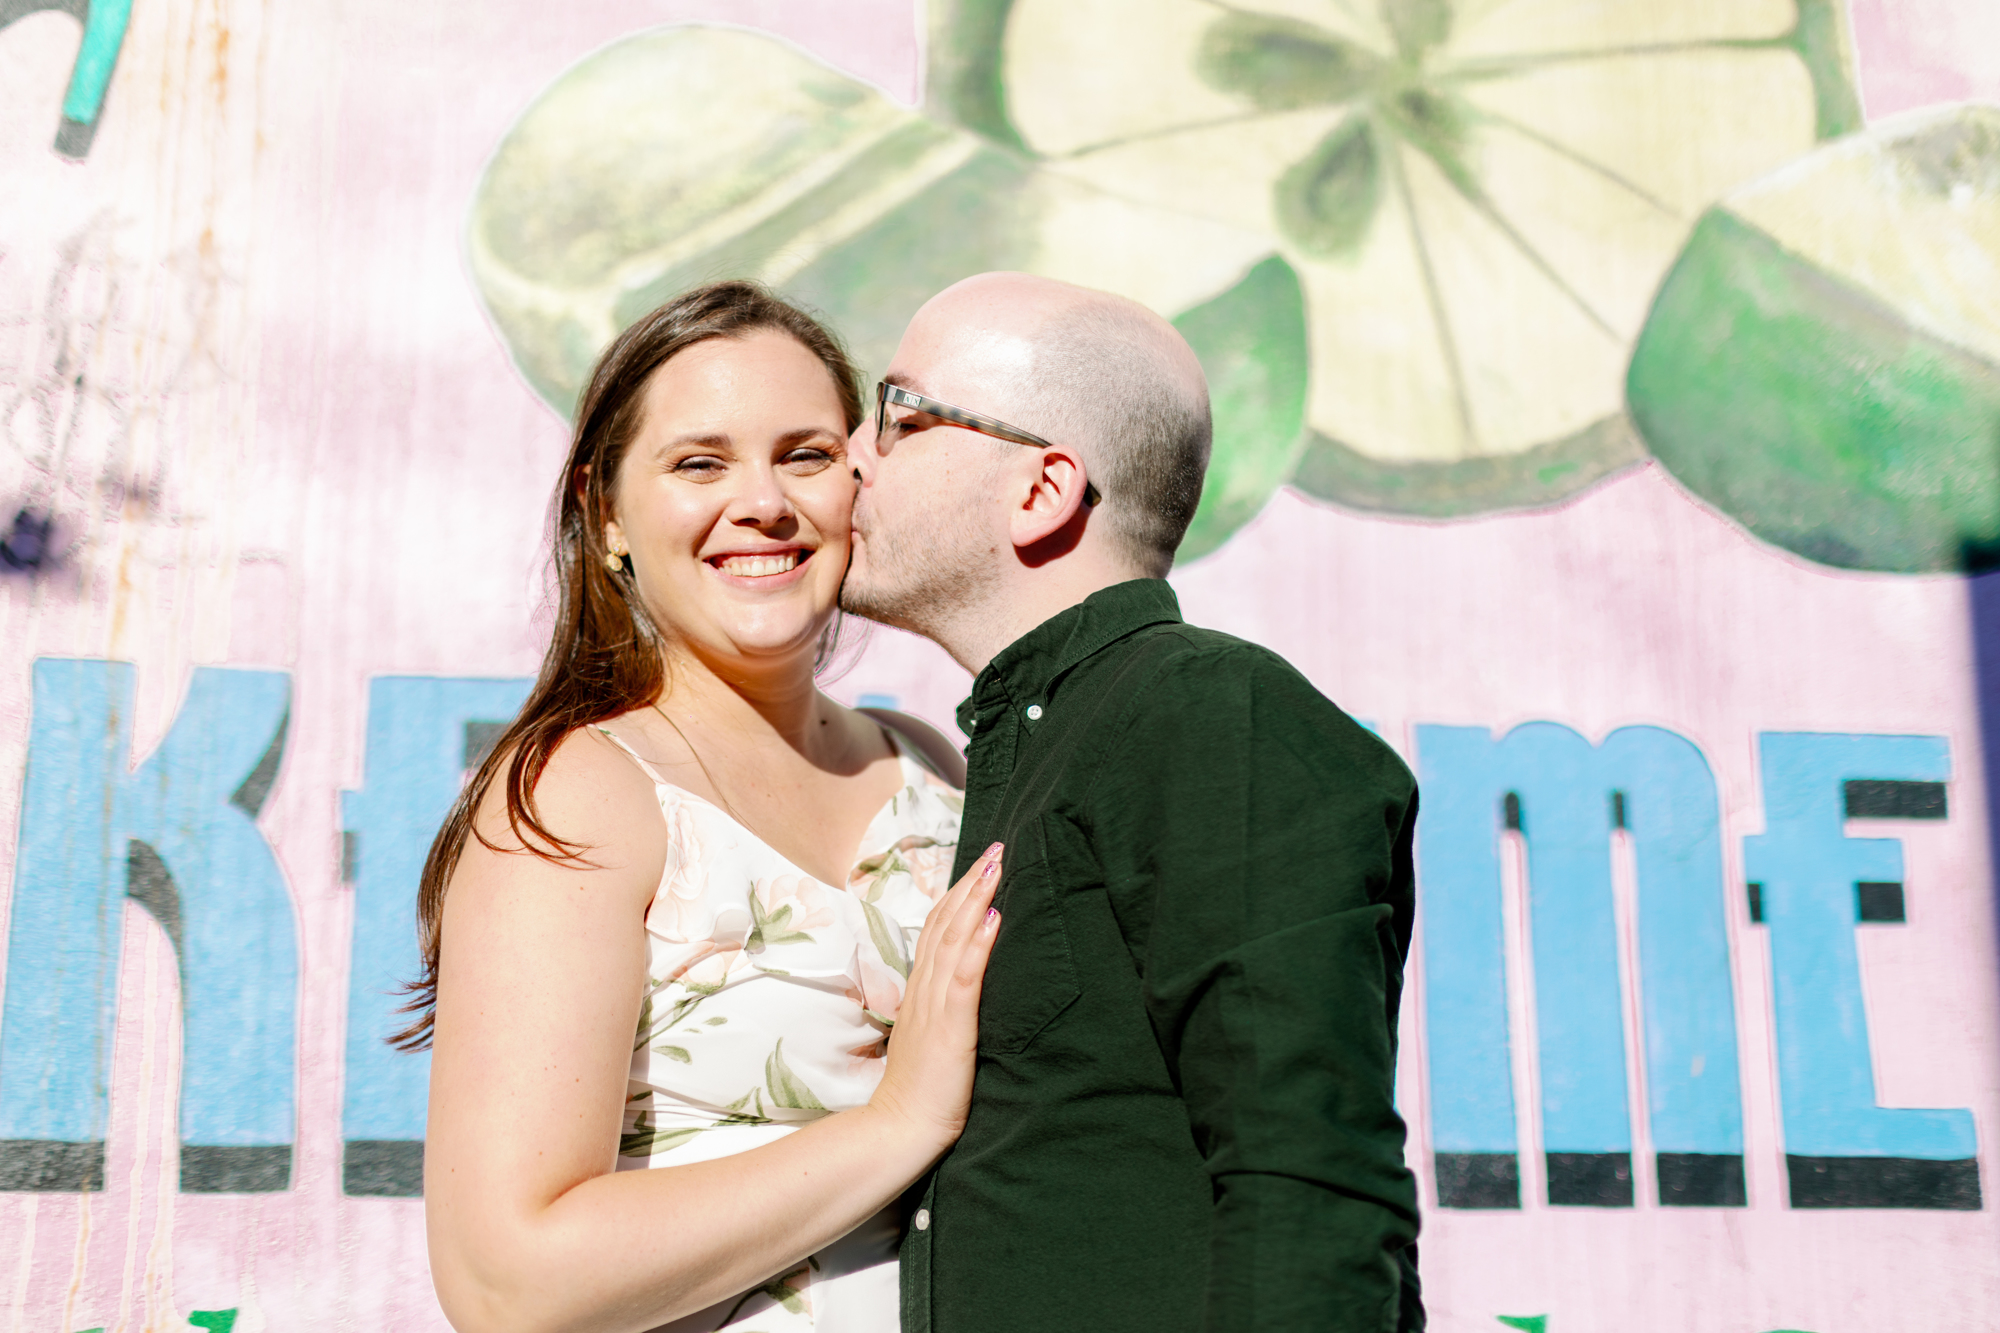 Pretty Low-Key Ceremony at Waterfront Redhook Elopement